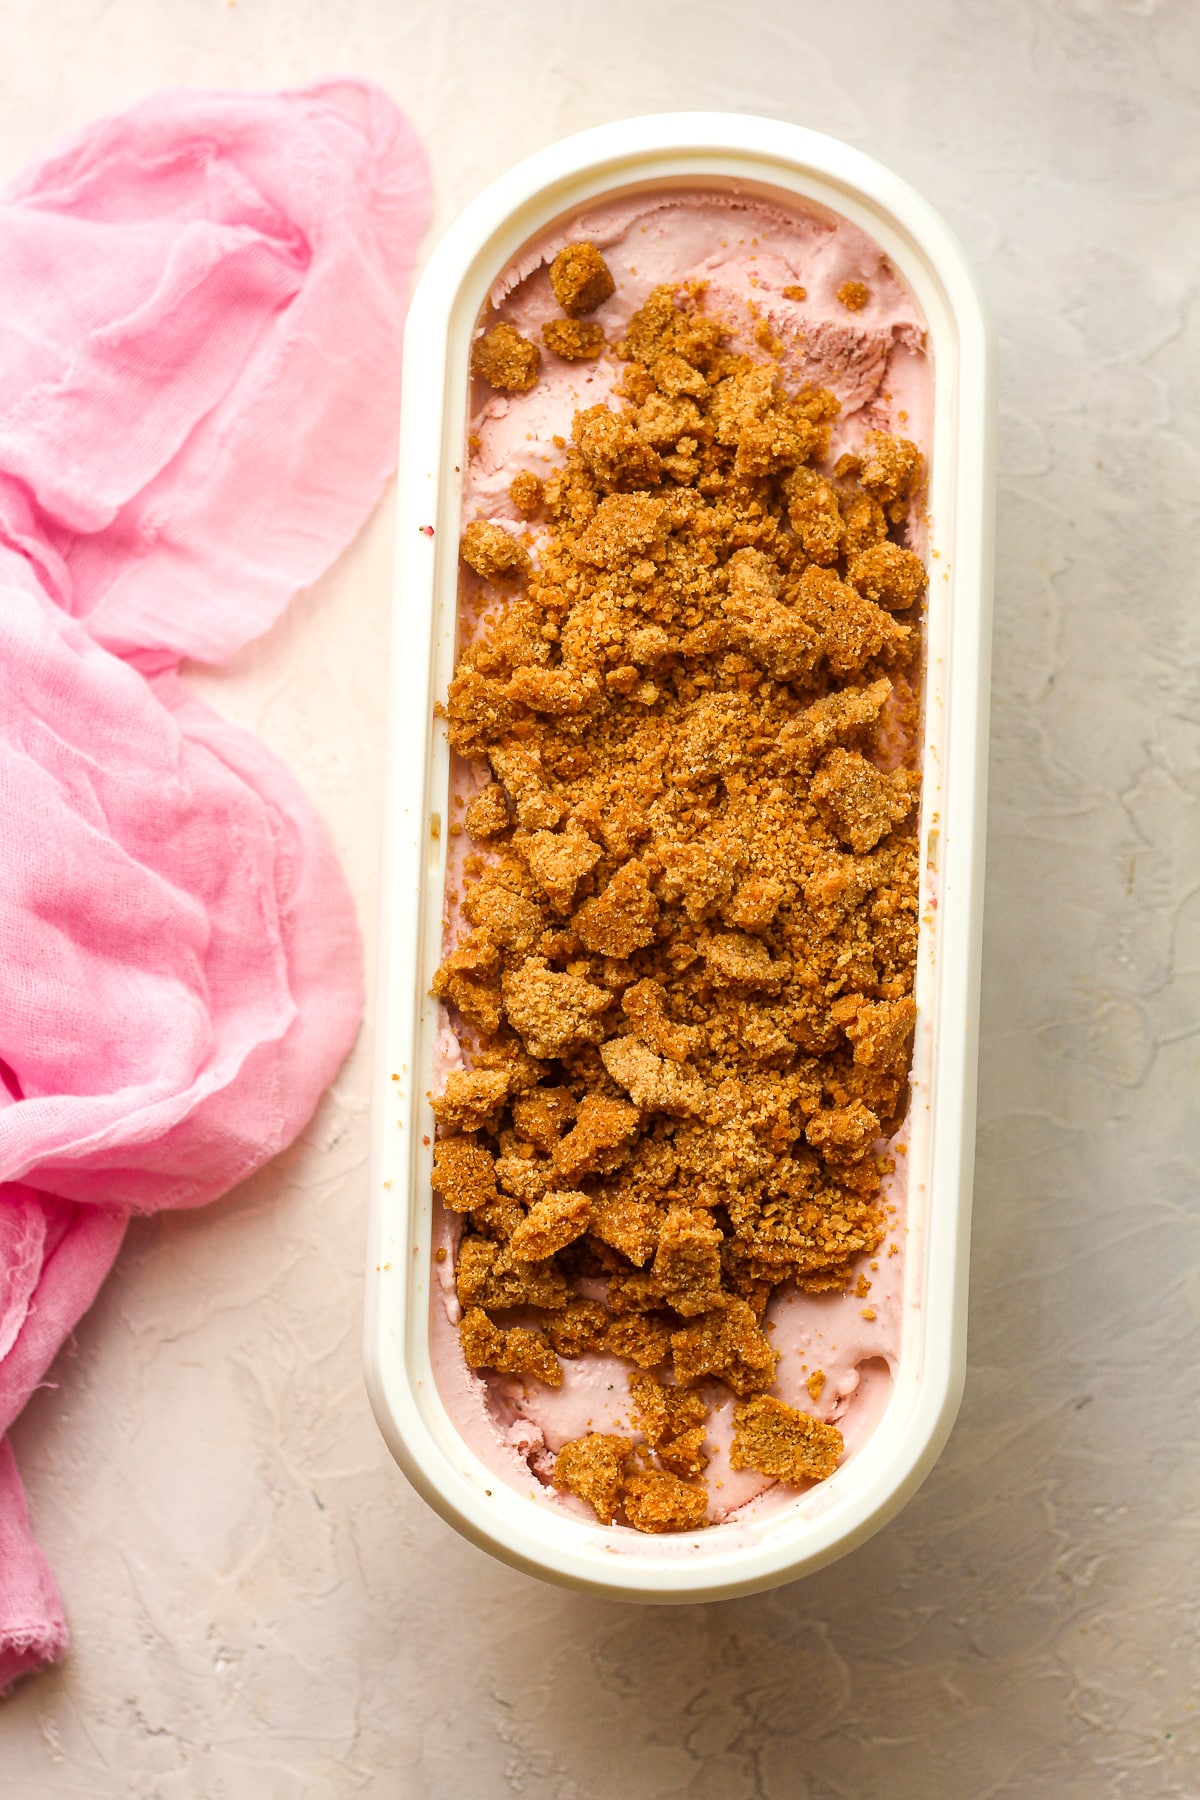 An oblong container of strawberry ice cream with graham cracker crumbles on top.